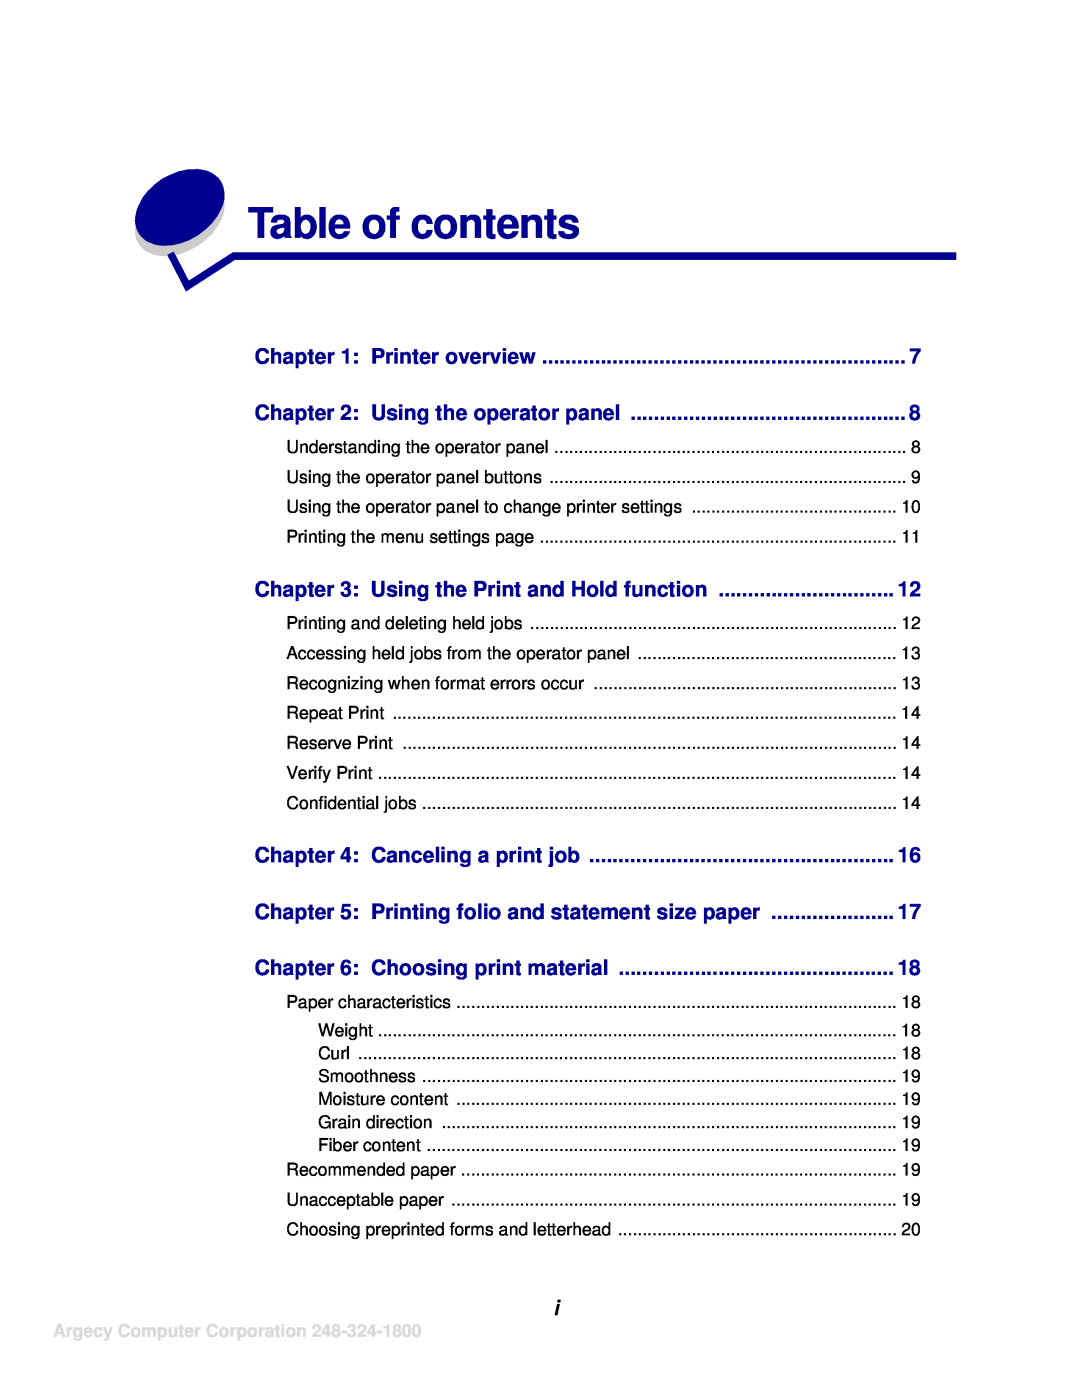 IBM 1120, 1125 manual Table of contents, Printer overview, Using the operator panel, Using the Print and Hold function 